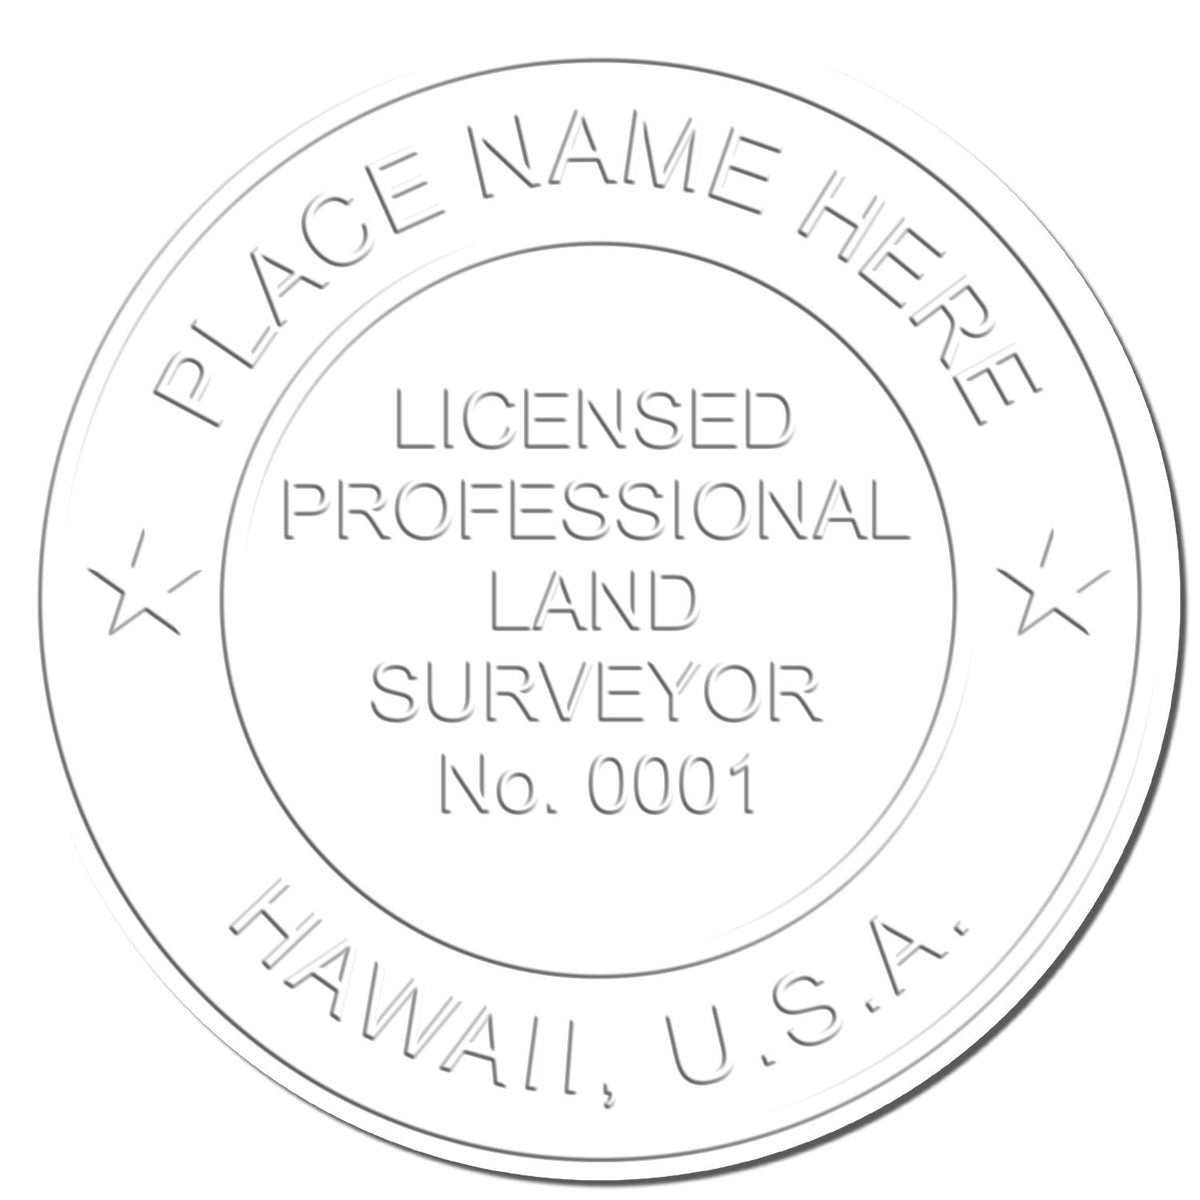 This paper is stamped with a sample imprint of the Hybrid Hawaii Land Surveyor Seal, signifying its quality and reliability.